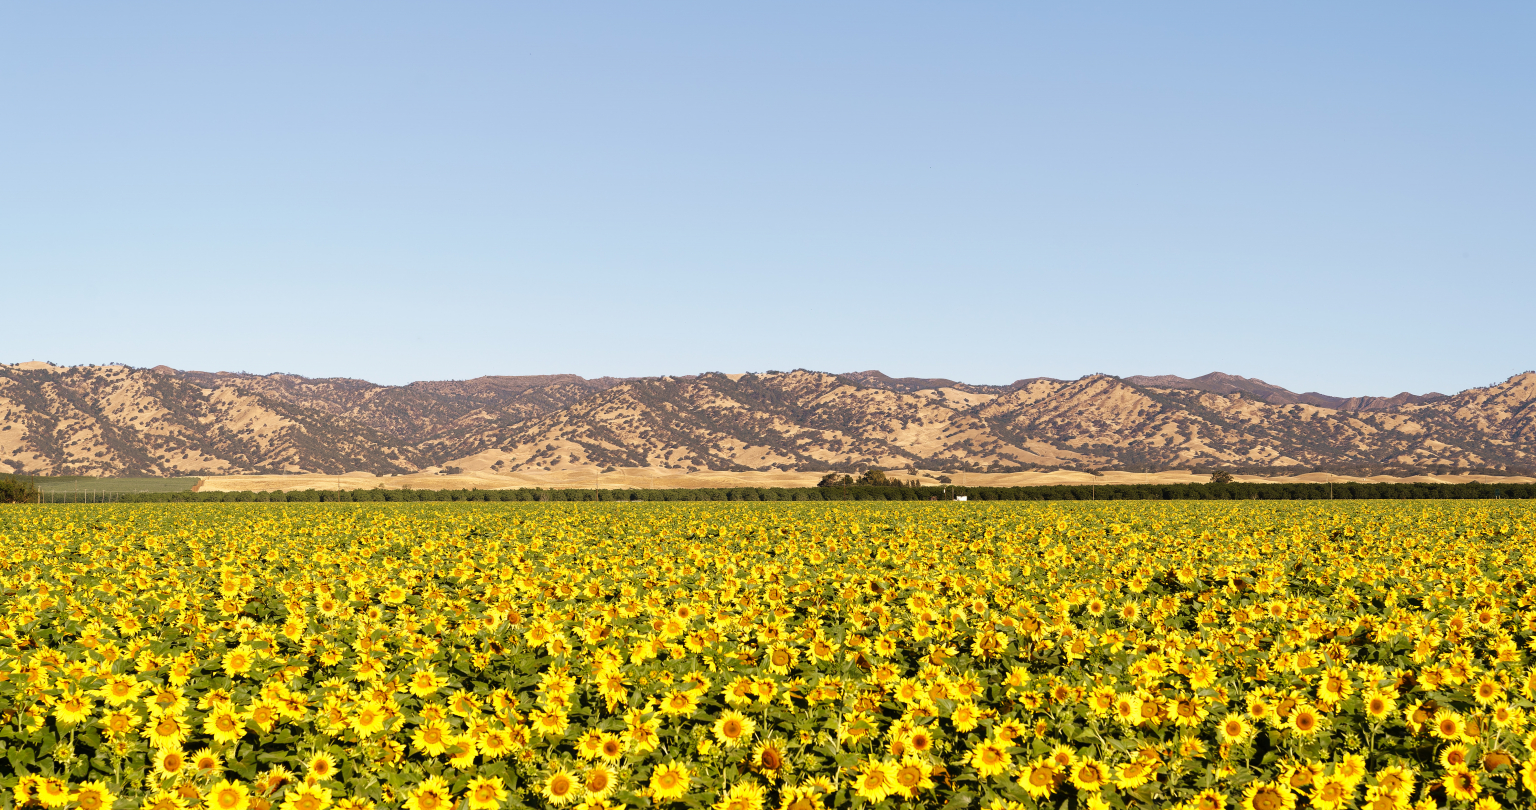 Thousands of bright yellow sunflowers turn their heads toward the sun in a field of sunflowers in Yolo County in California.